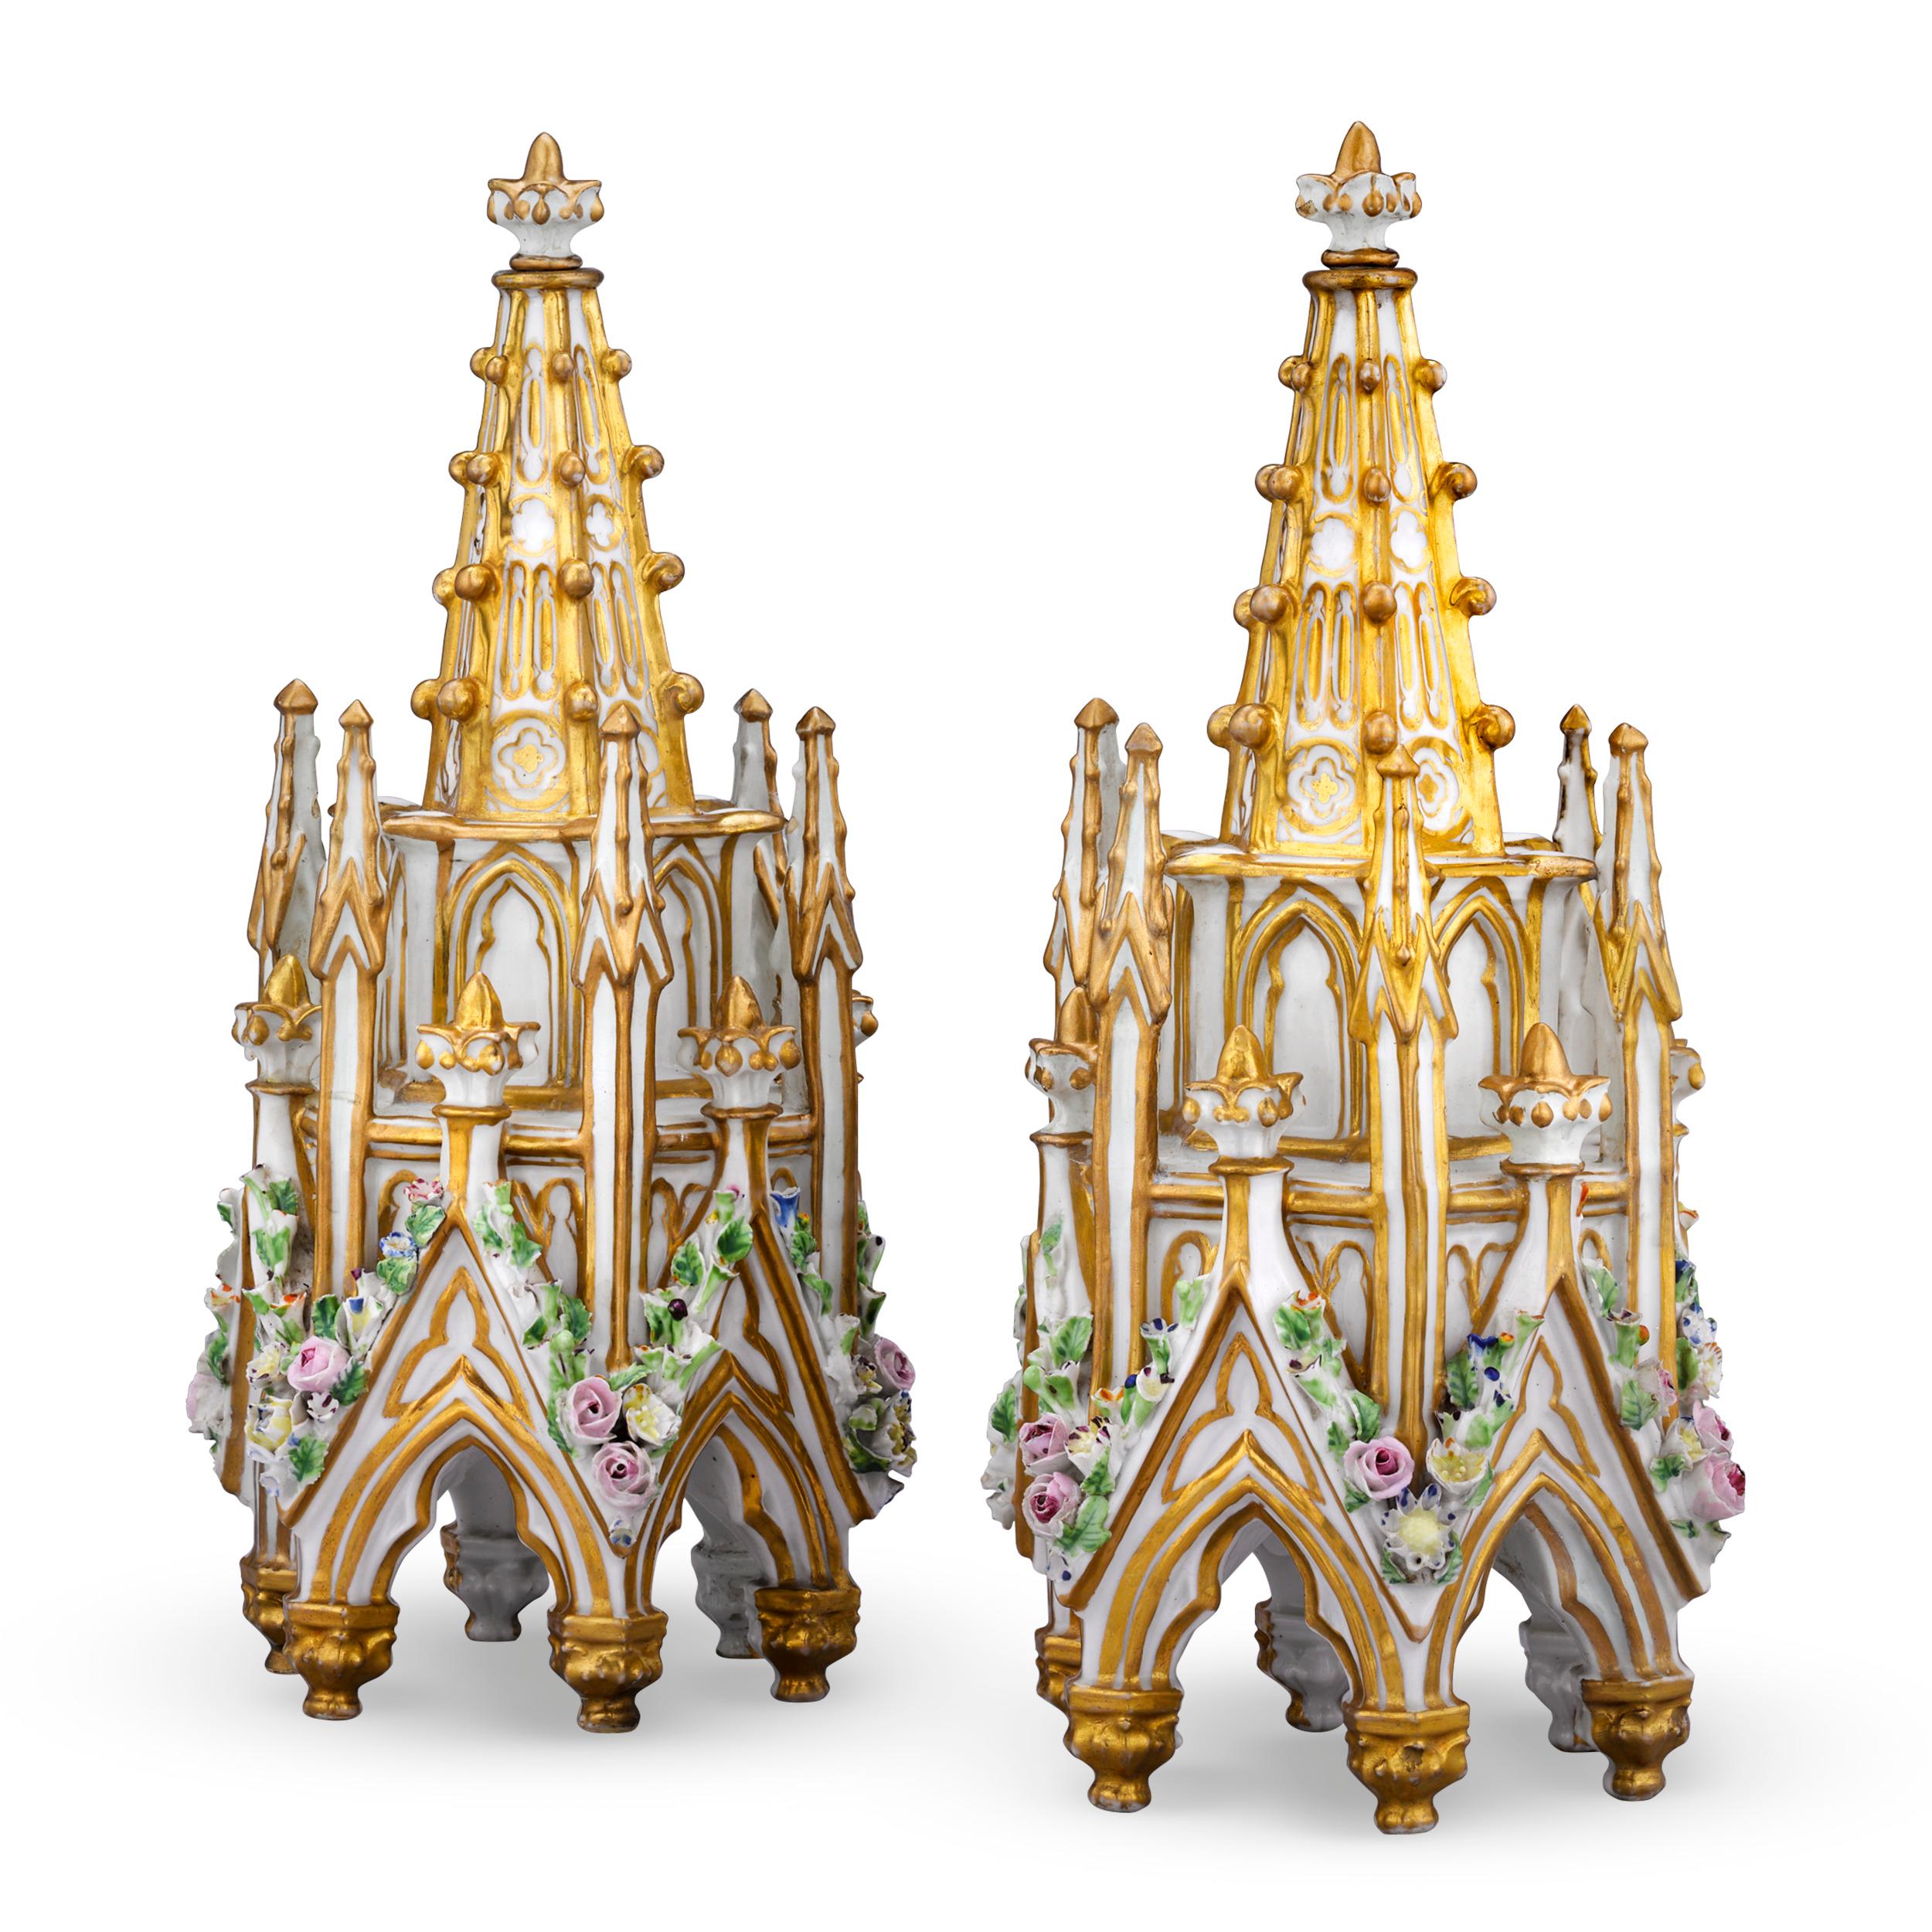 These striking perfume bottles were crafted by renowned French porcelain artist Jacob Petit. The pair's highly unique hexagonal spire form brings to mind the architecture of a Gothic cathedral. Encrusted with colorful hand-painted flowers against a